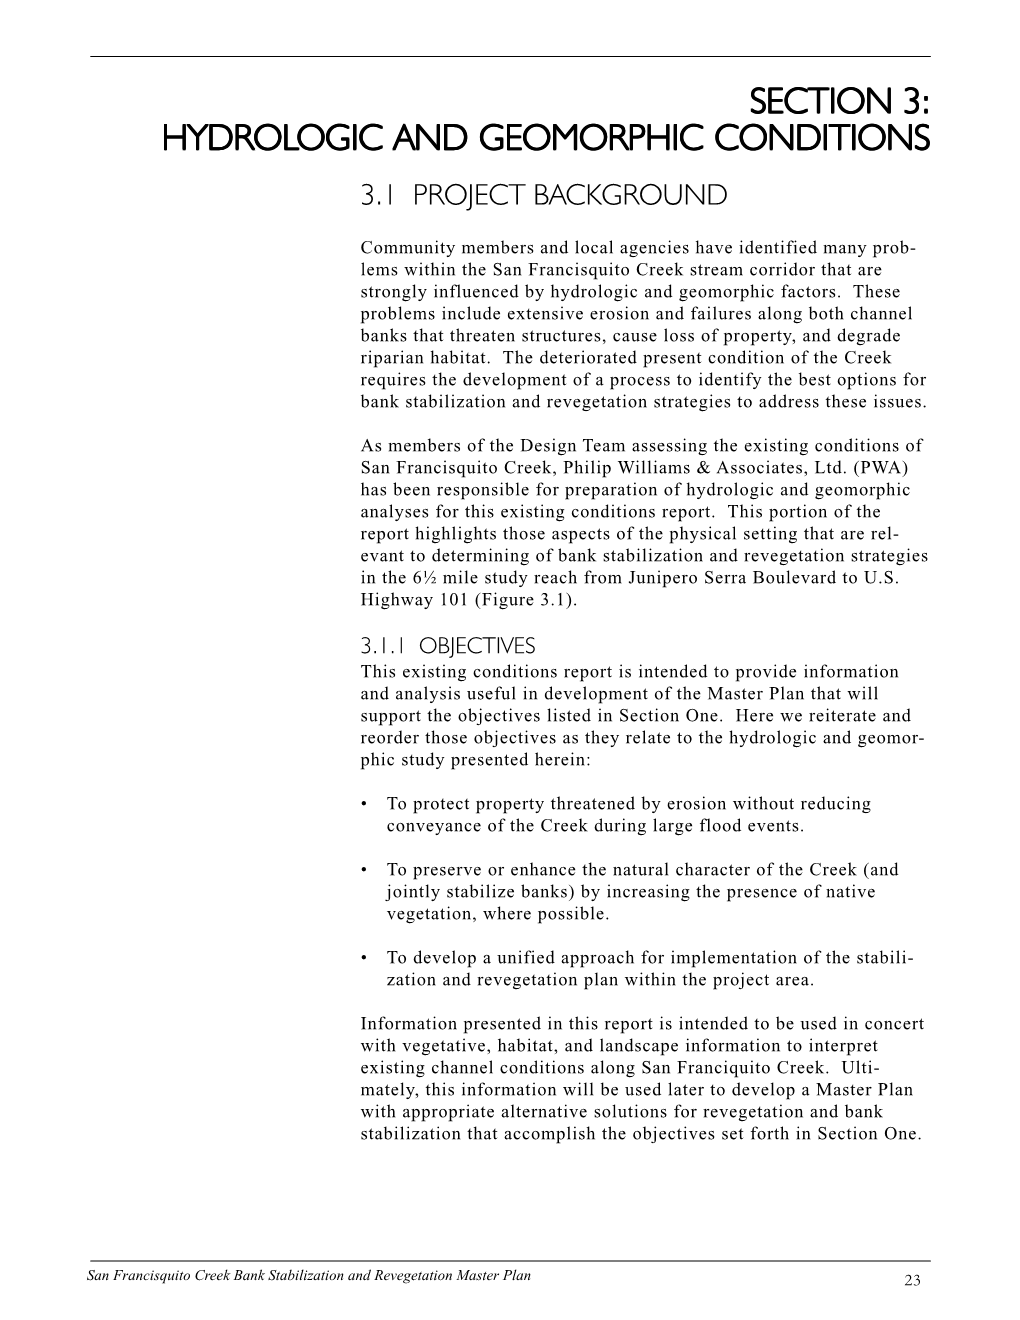 Section 3: Hydrologic and Geomorphic Conditions 3.1 Project Background